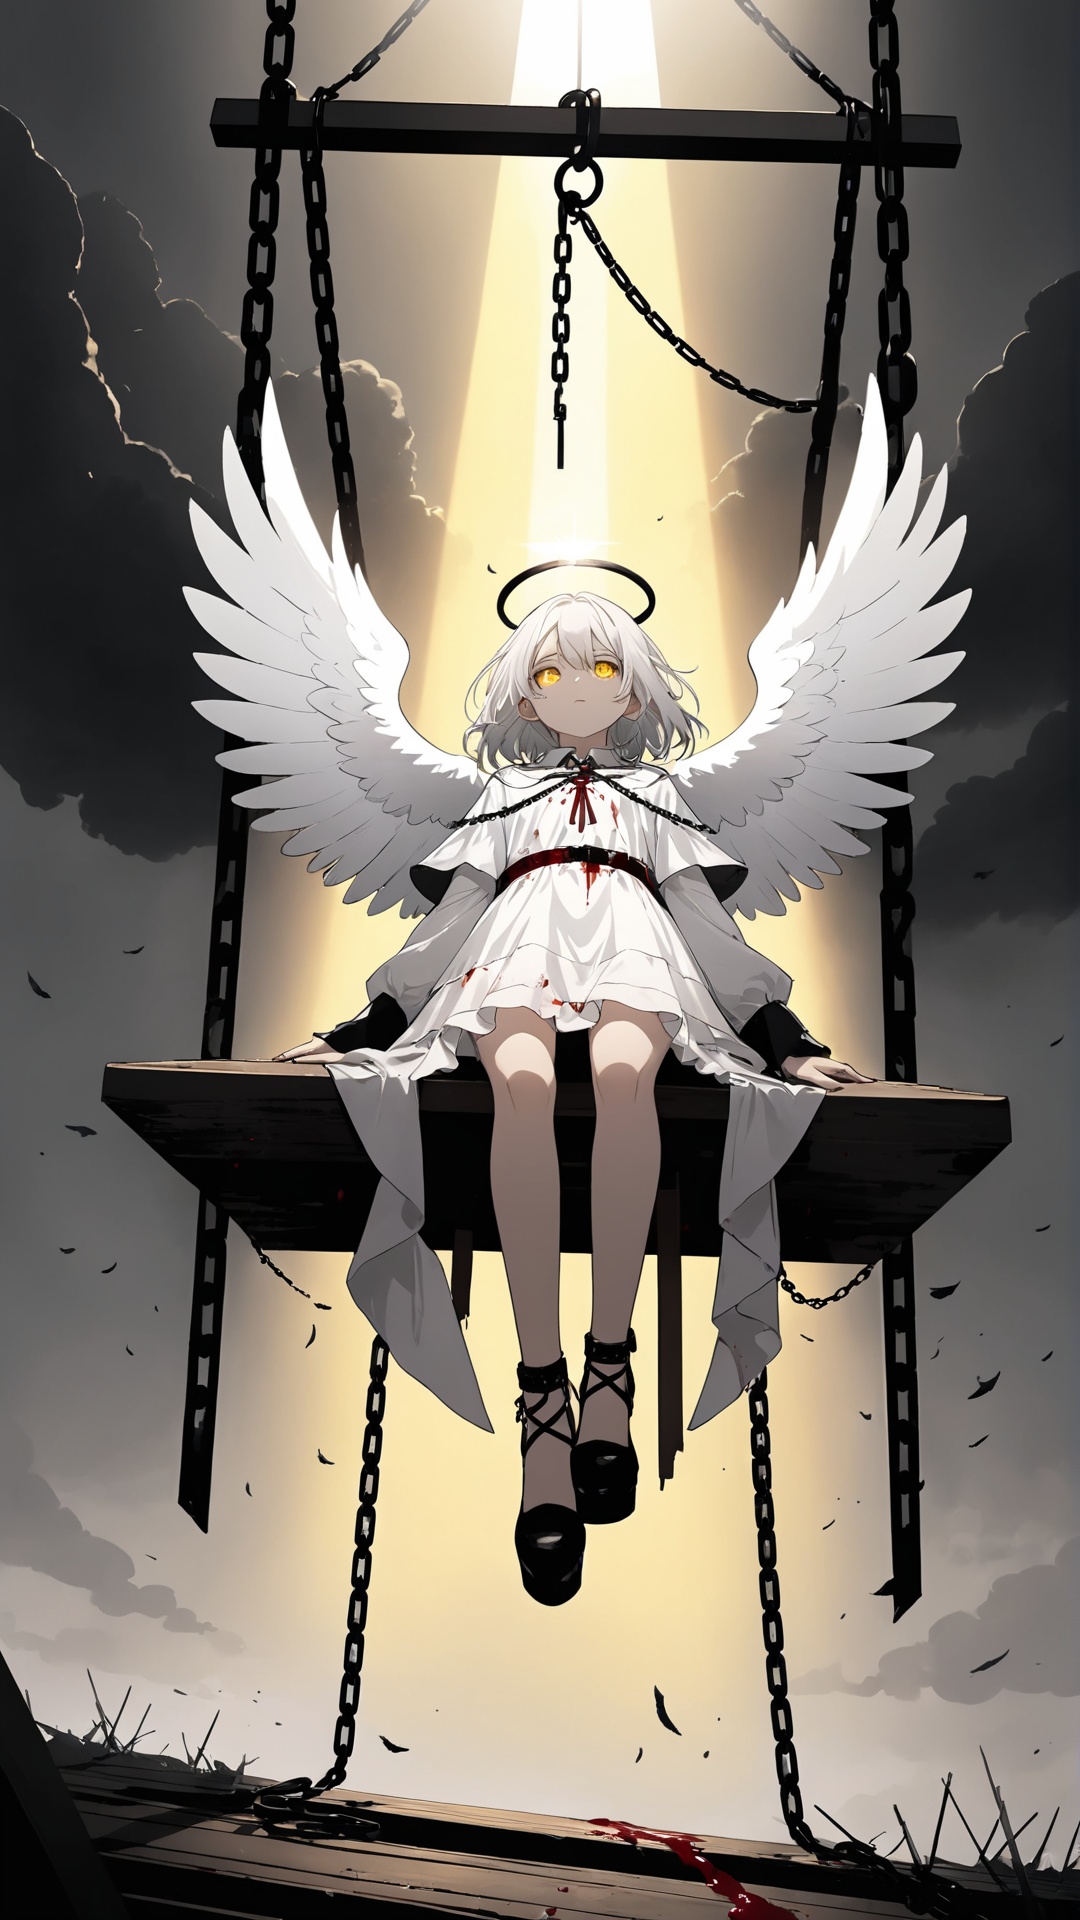  (from below:1.25), (god rays:1.2),
(1 angel:1.2) floating on (platform gallows:1.3), guillotine, (full body), (hanging:1.3), (hands behind back:1.3)
(white angel wings:1.25), (broken:1.4) white dress, dirty dress, dust, blood, (yellow eyes), glowing eyes, long white hair, (solo)
holiness, ((black chains:1.2) wrapped around the angel:1.2), **** of shoe, deadpan, (Torn clothes:1.2)
(on platform gallows:1.2), execution ground, (dark clouds), (floating feather)
